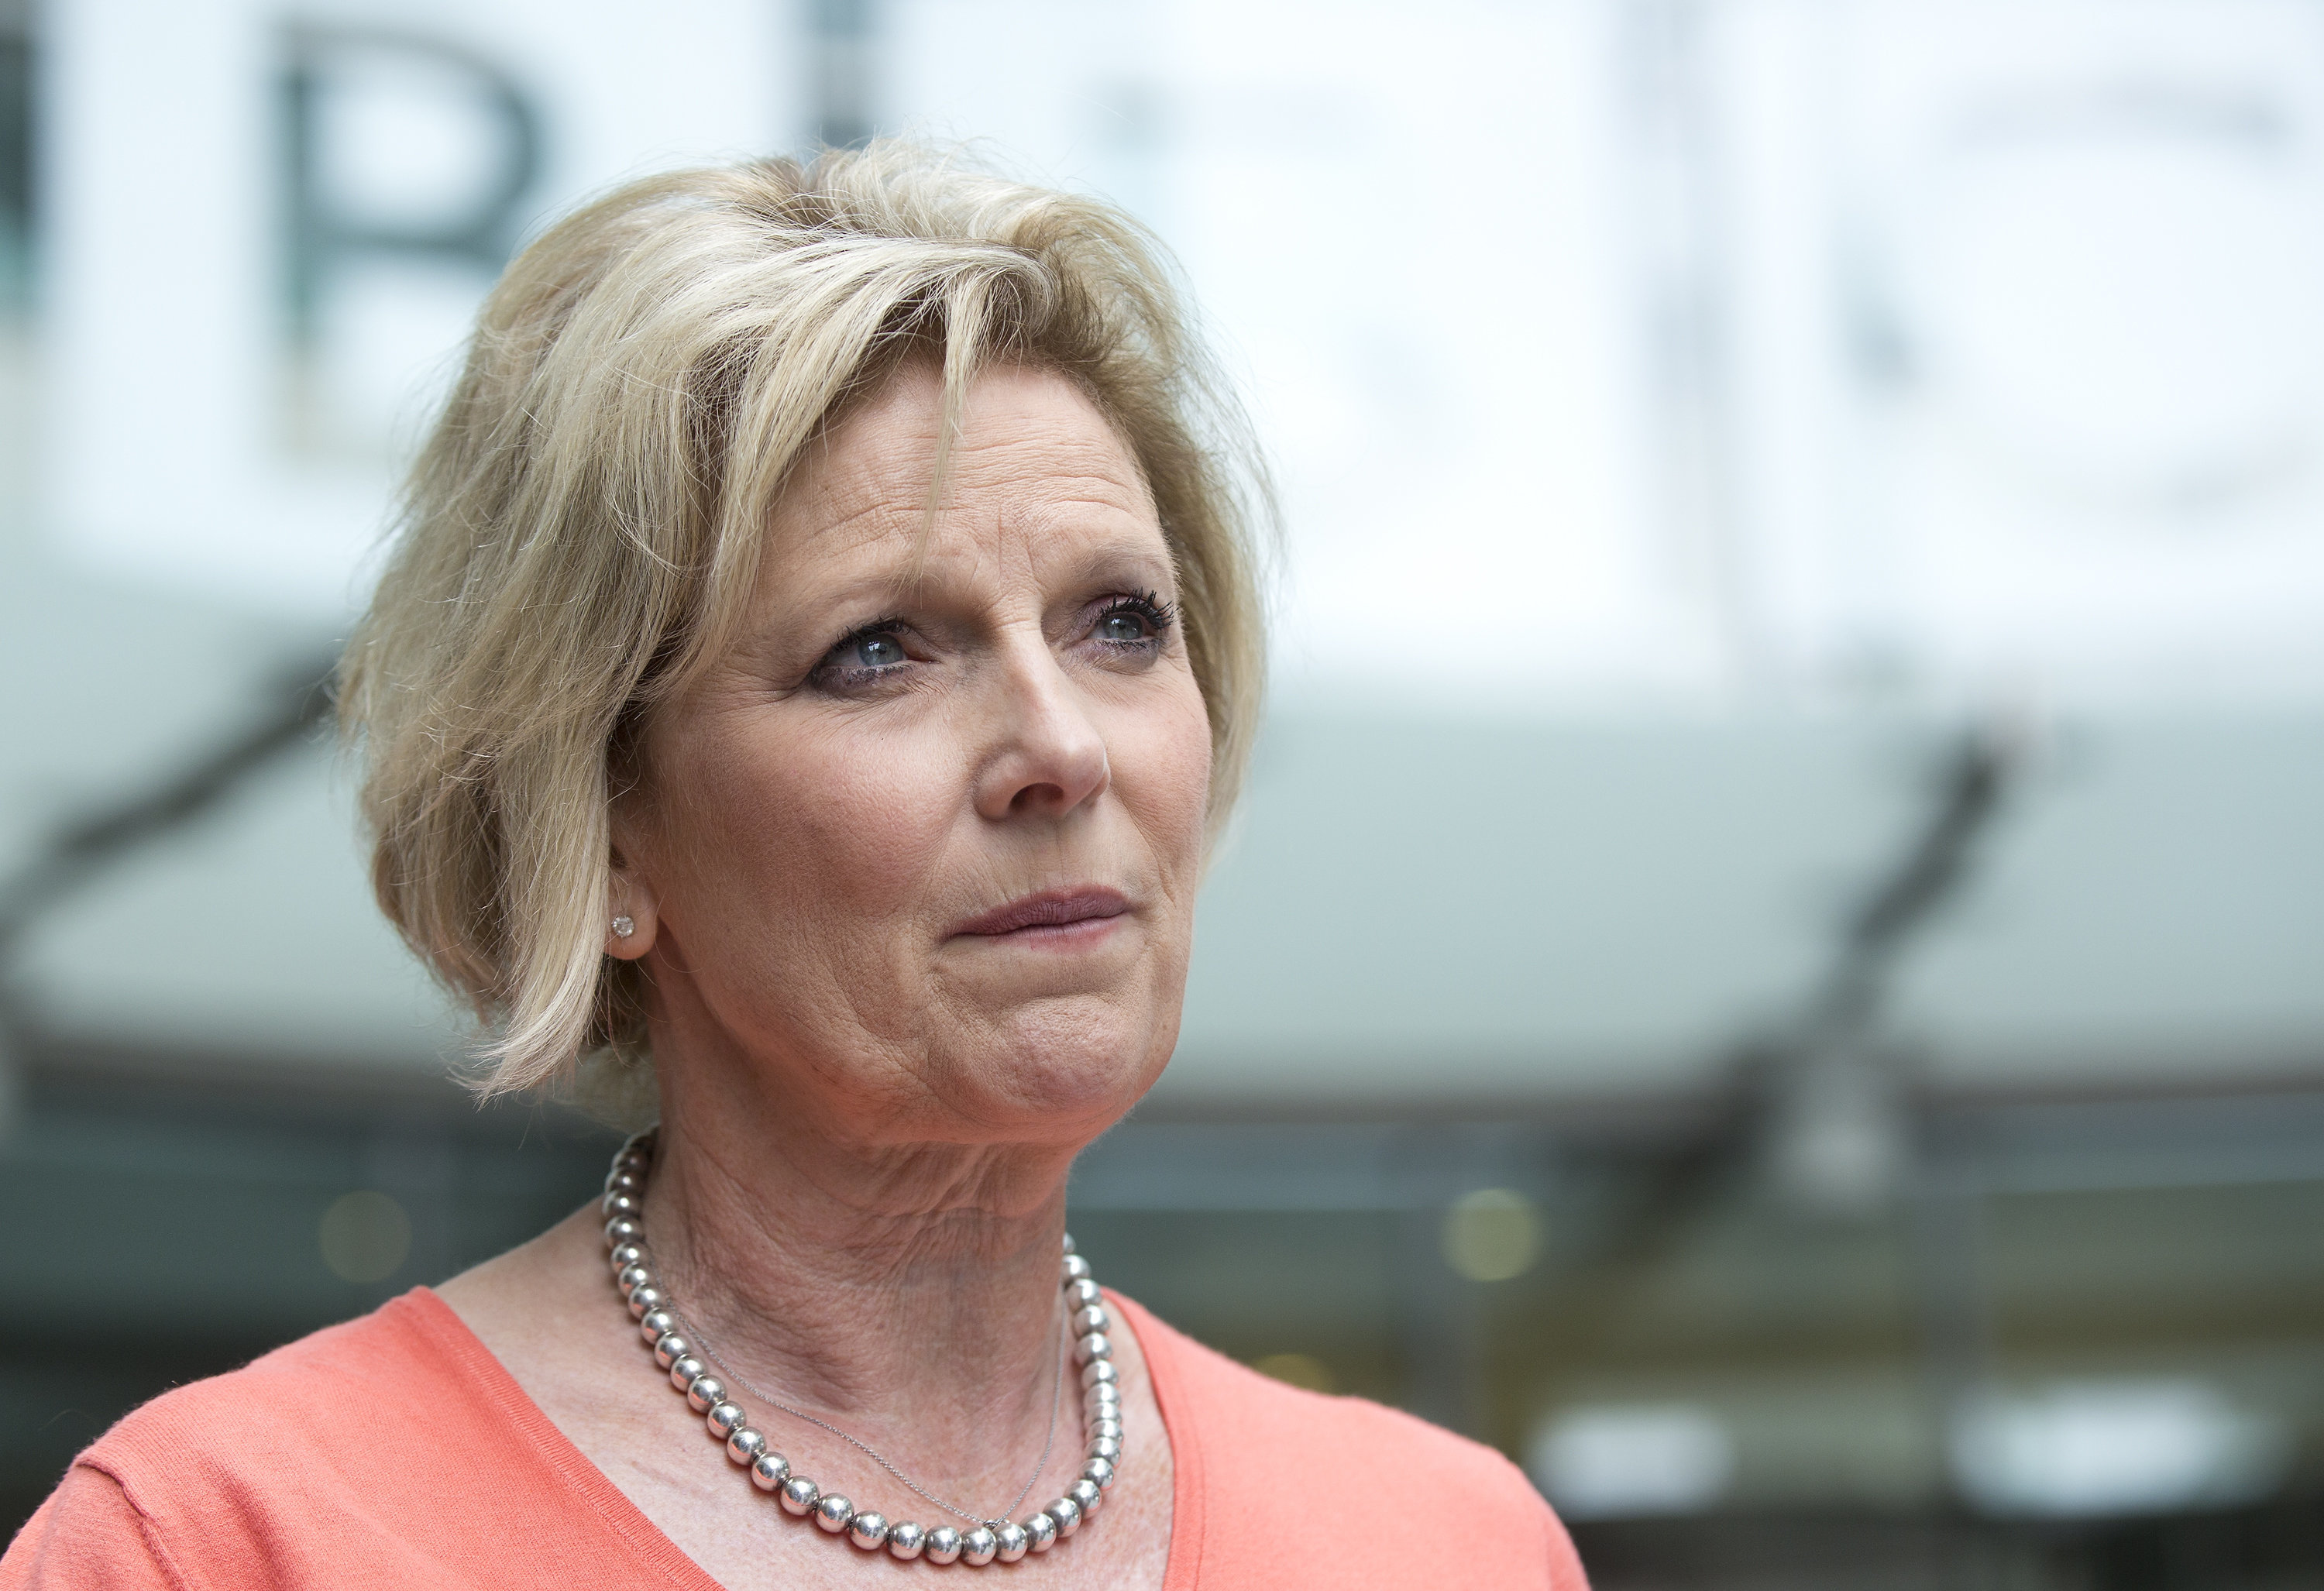 Conservative Anna Soubry said it was 'bizarre' Brexit was not debated that much.